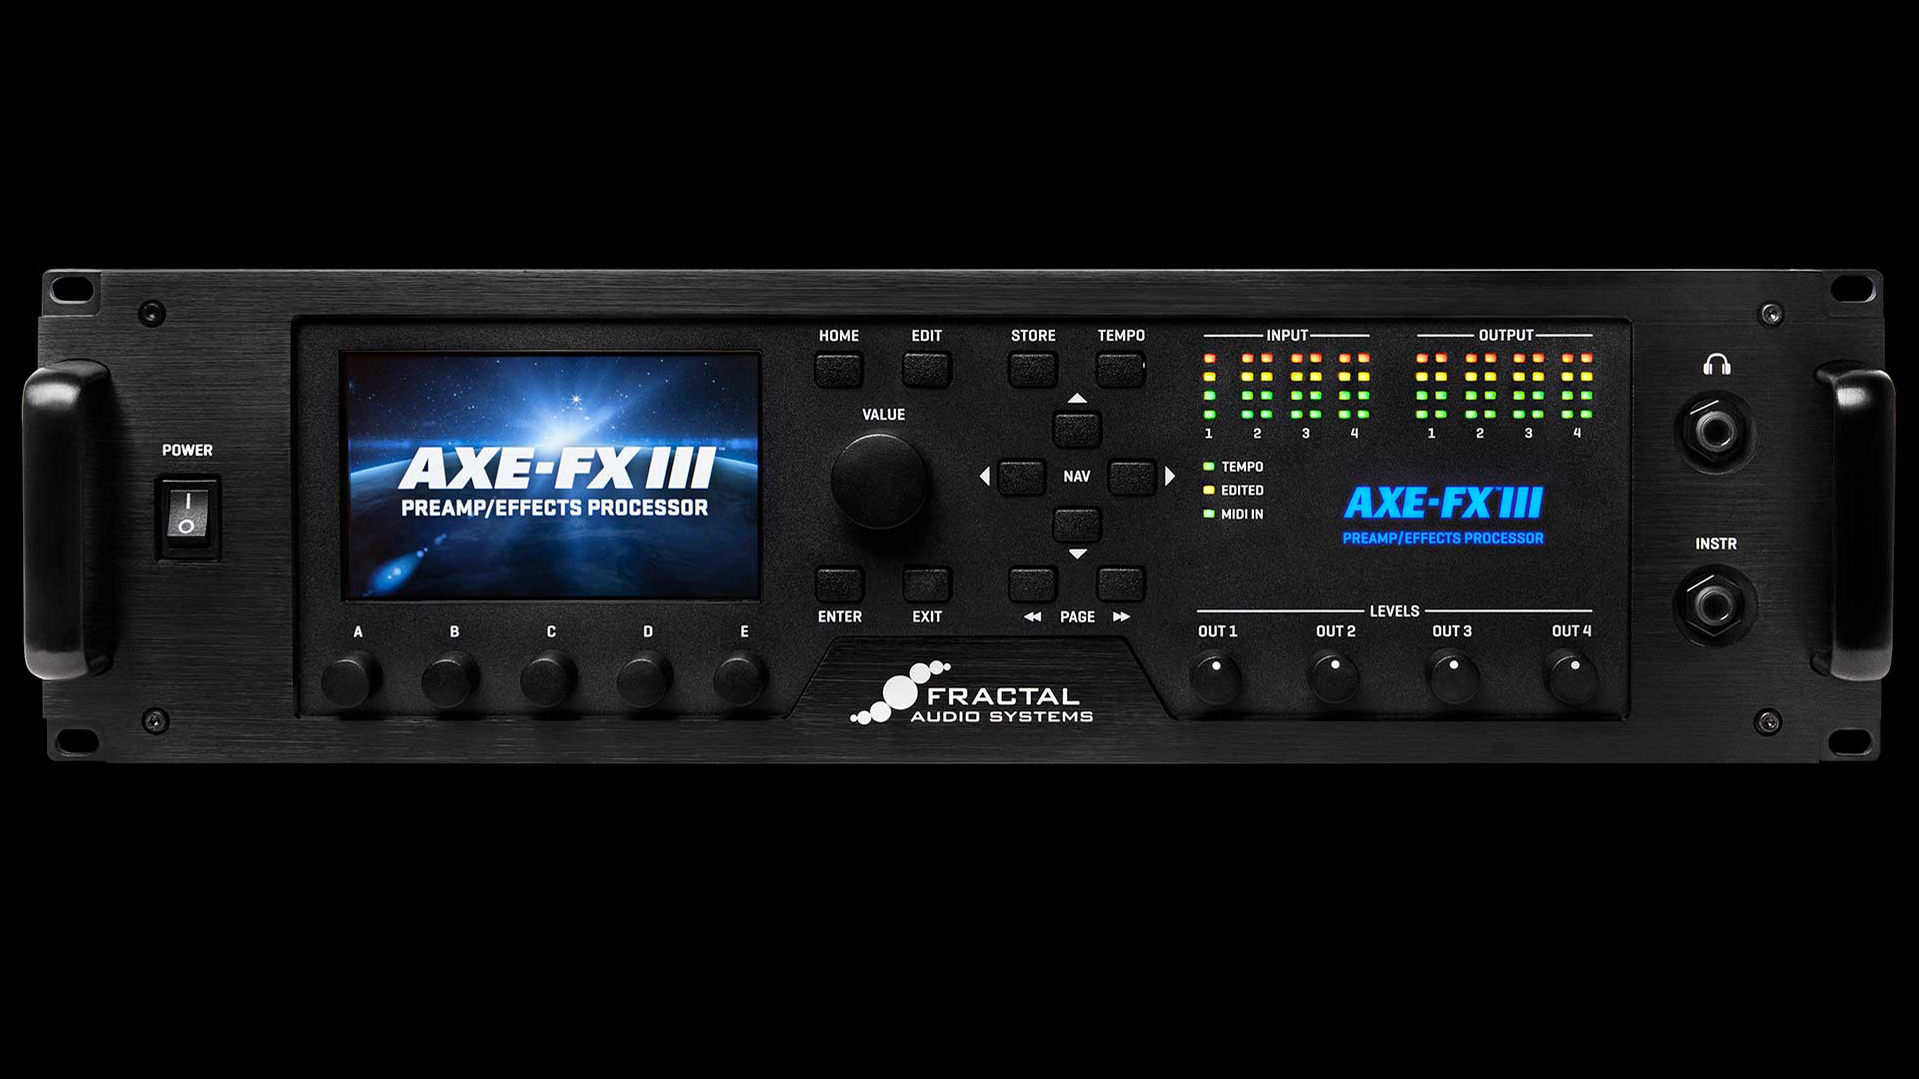 Axe-Fx III is the most powerful effects processor ever | MusicRadar